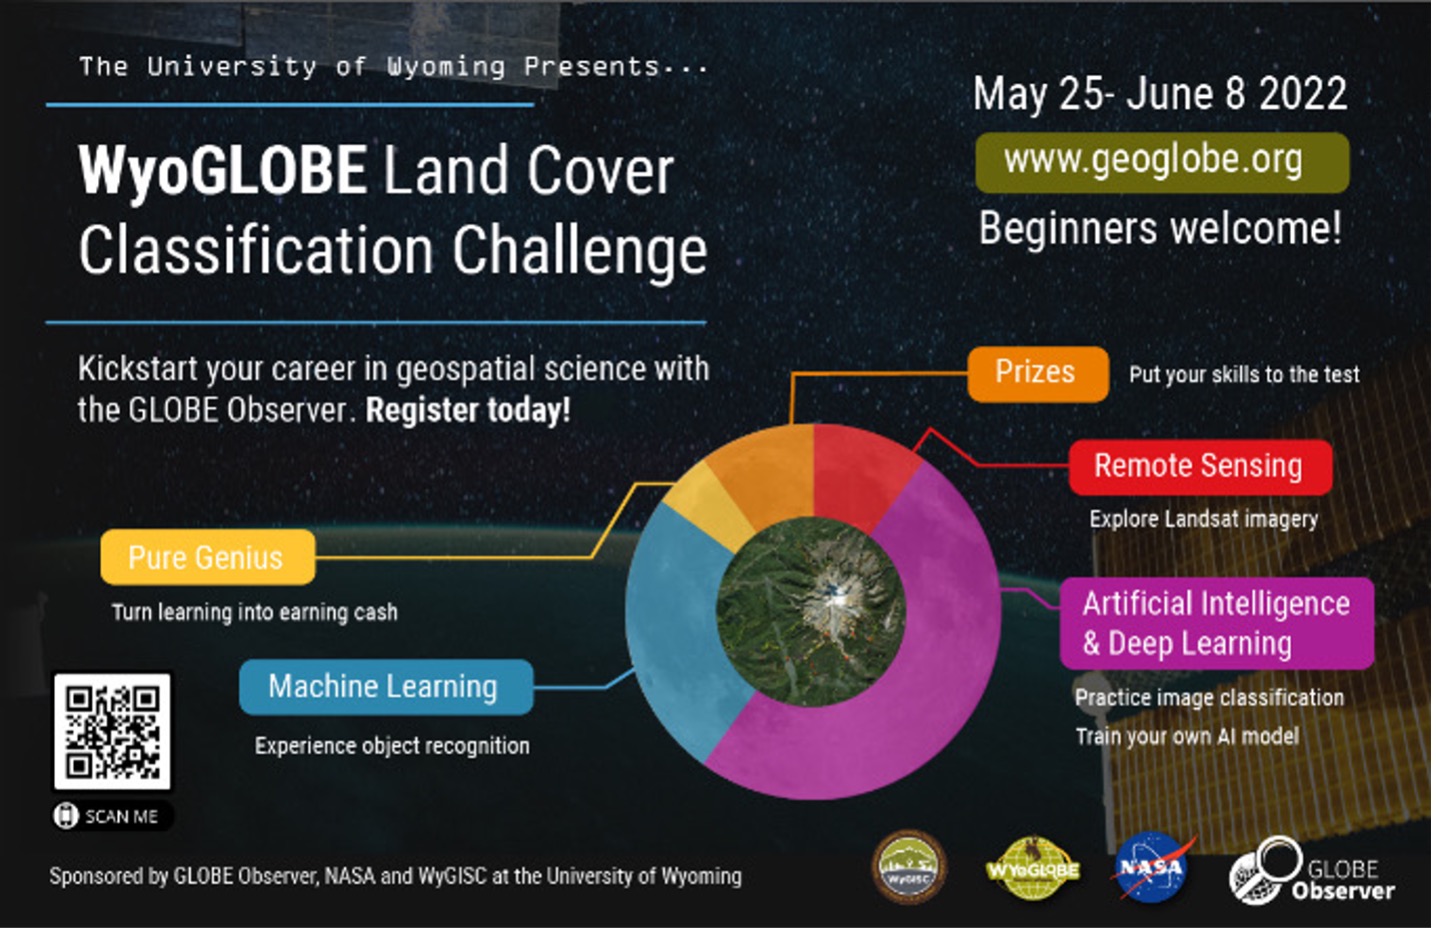 Shareable with text that describes the University of Wyoming's WyoGLOBE Land Cover Classification Challenge, that was held from 25 May to 08 June 2022, with notations about machine learning, remote sensing, AI and deep learning, and more. The URL is www.geoglobe.org.